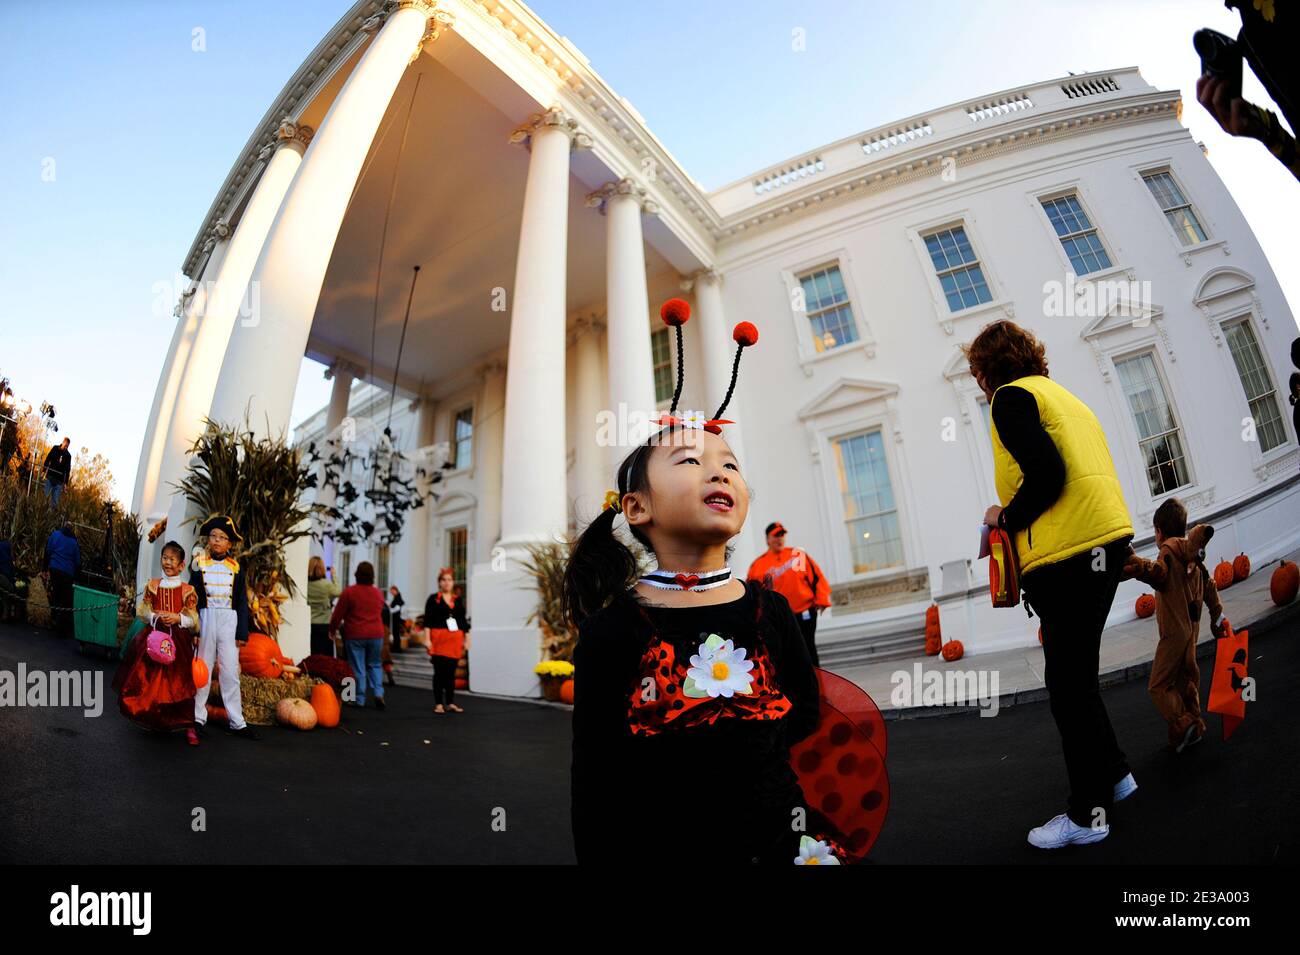 Kids gather for trick or treating at the North Portico of the White House, in Washington, DC, USA on October 31, 2010. US President Barack Obama and First Lady Michelle Obama will greet trick or treaters at the North Portico of the White House to celebrate Halloween. Photo by Olivier Douliery/ABACAPRESS.COM Stock Photo